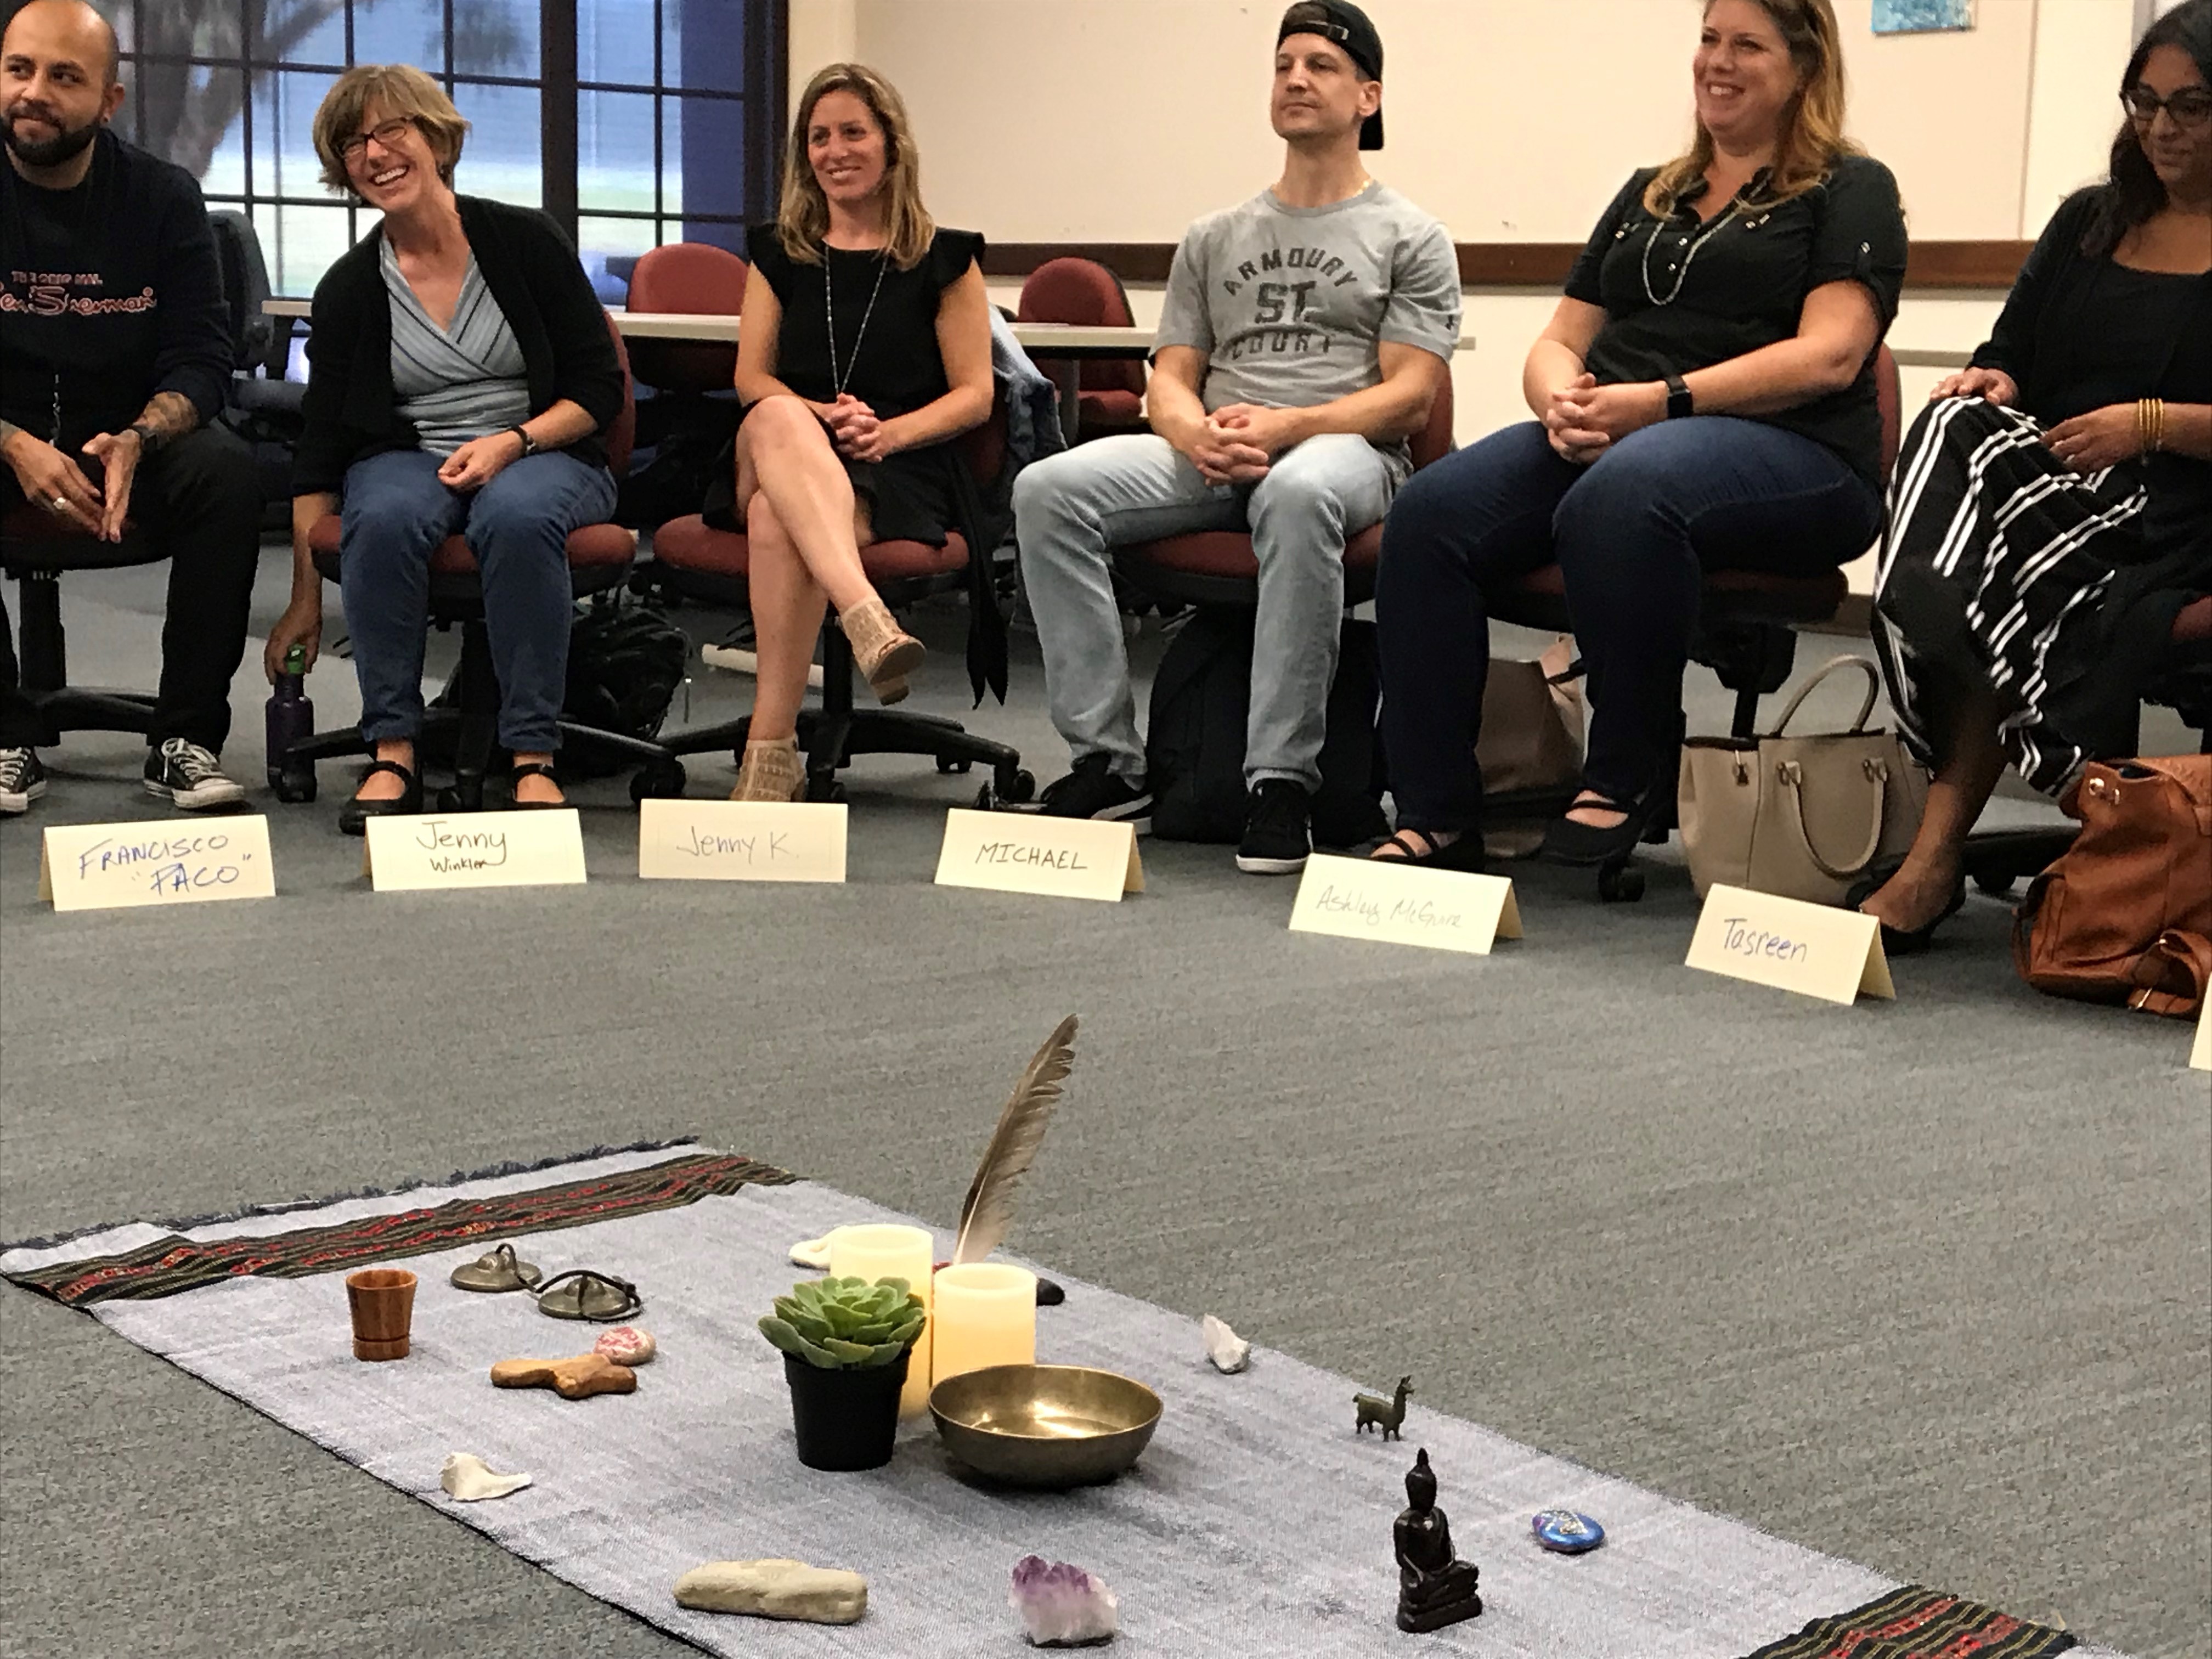 A representation of a restorative justice facilitation of a circle technique showing five people sitting in a circle